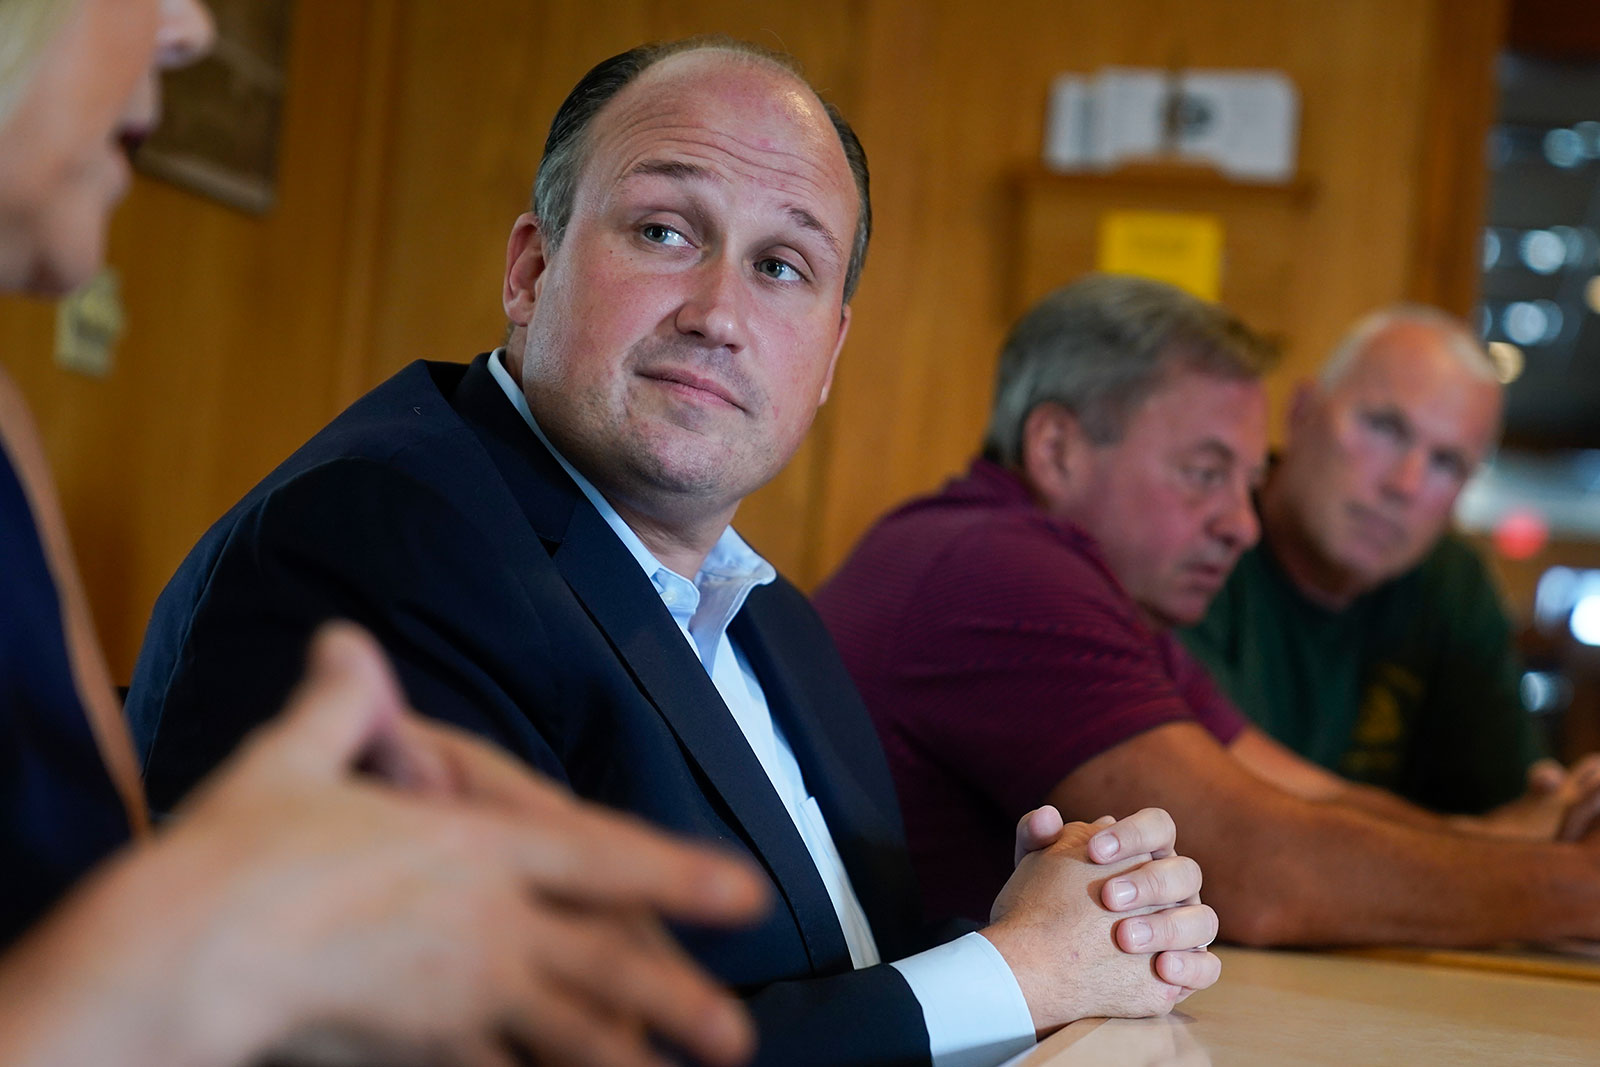 Nick Langworthy listens to supporters during an event in Elmira, New York, on Monday, August 22.